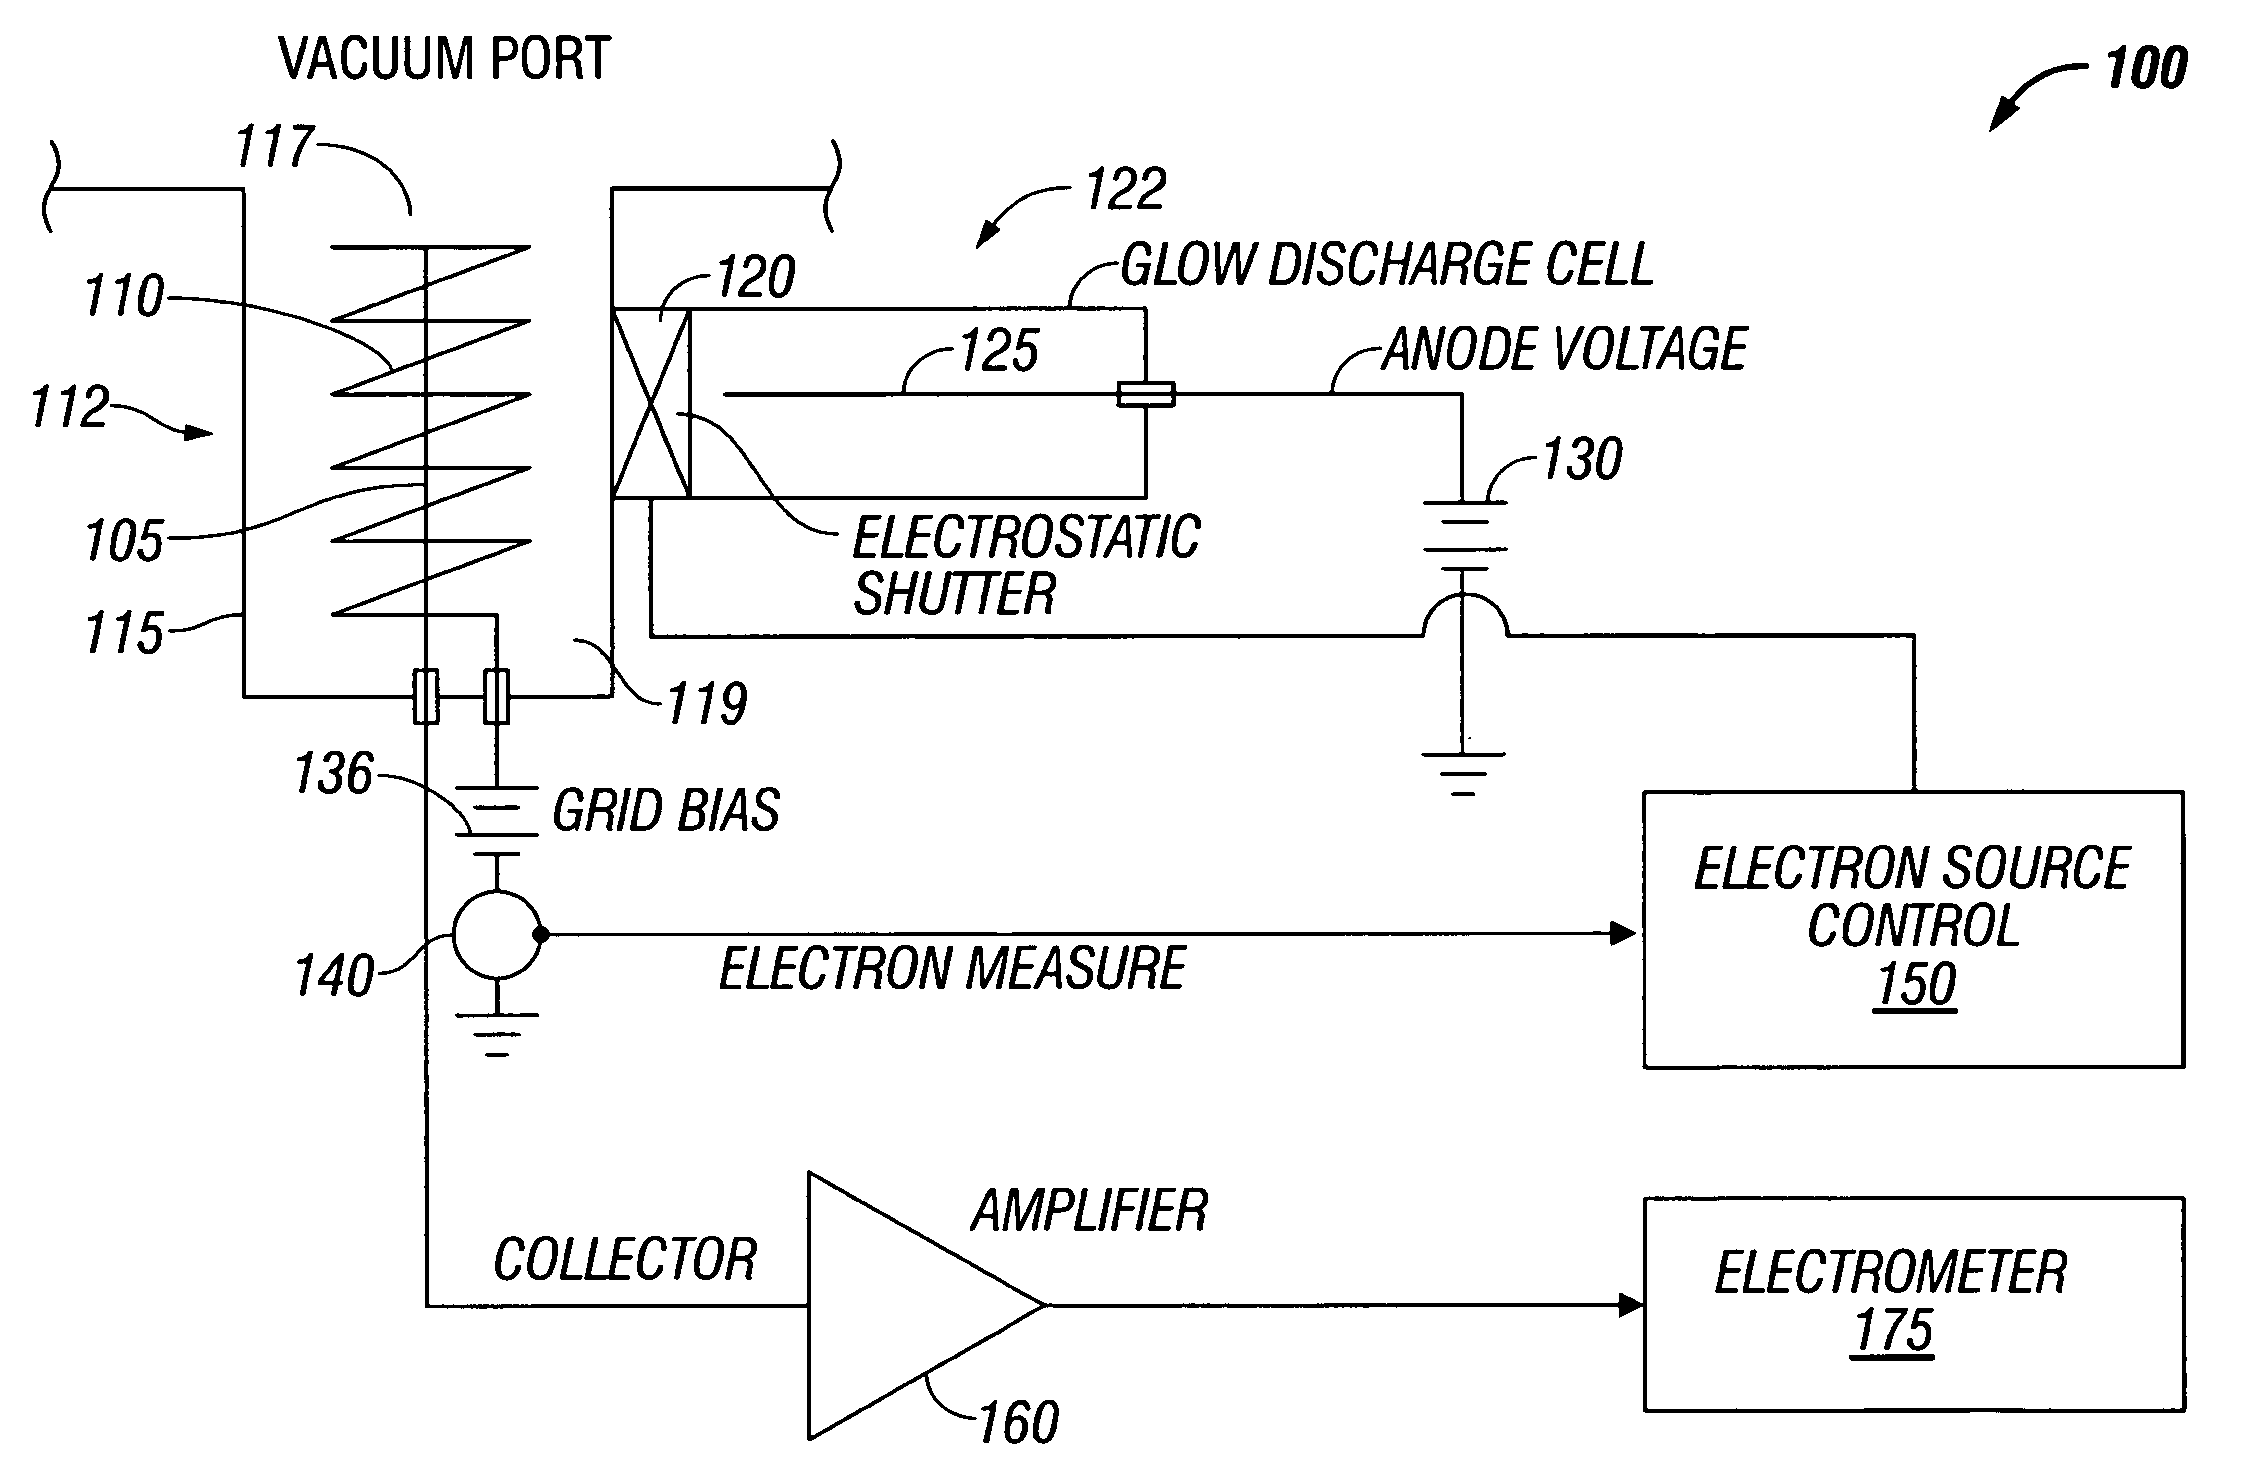 Ionization gauge with a cold electron source